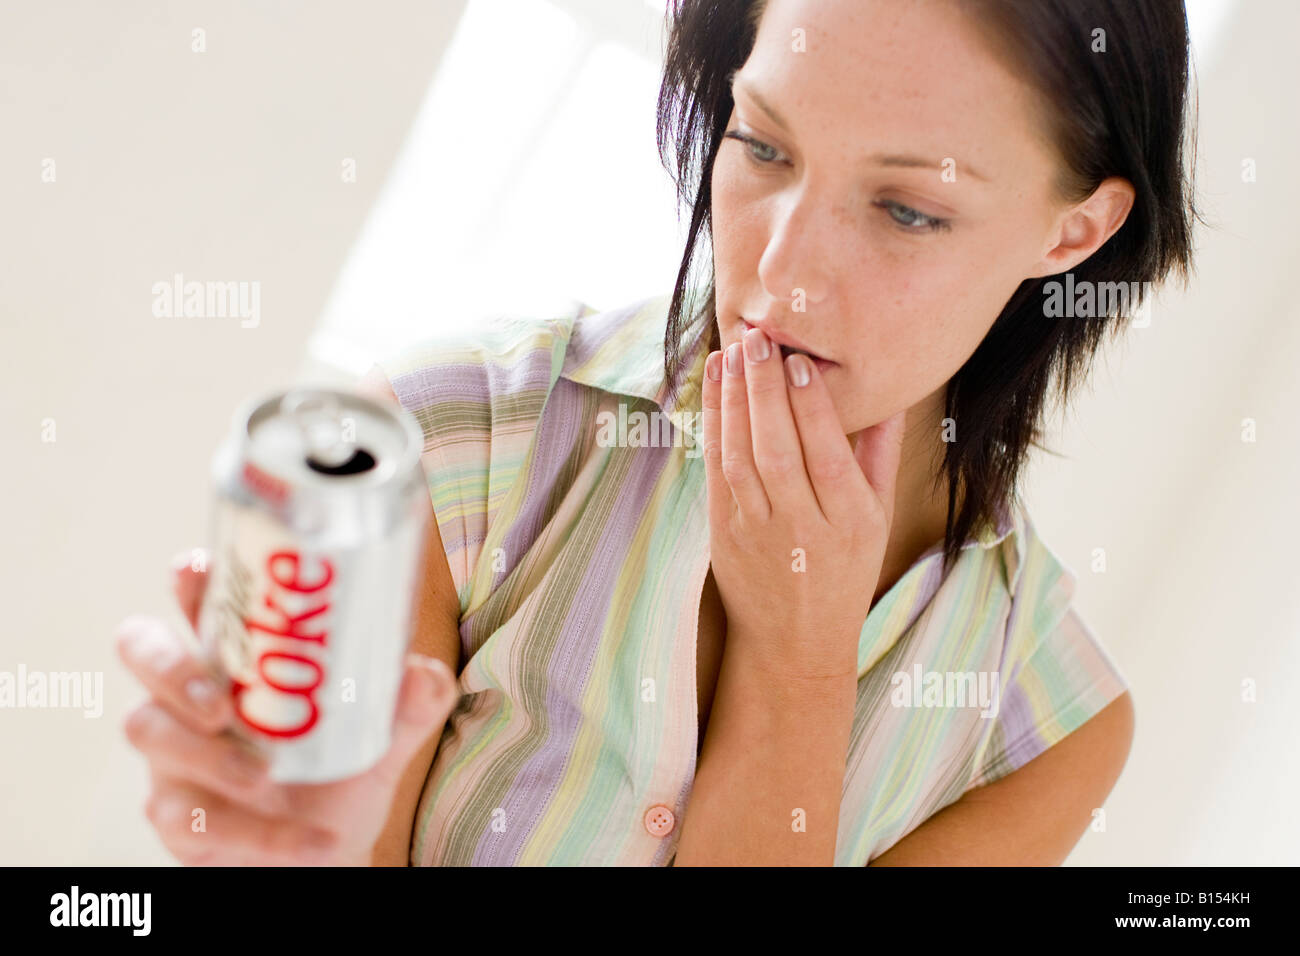 Girl with diet Coke drink Stock Photo